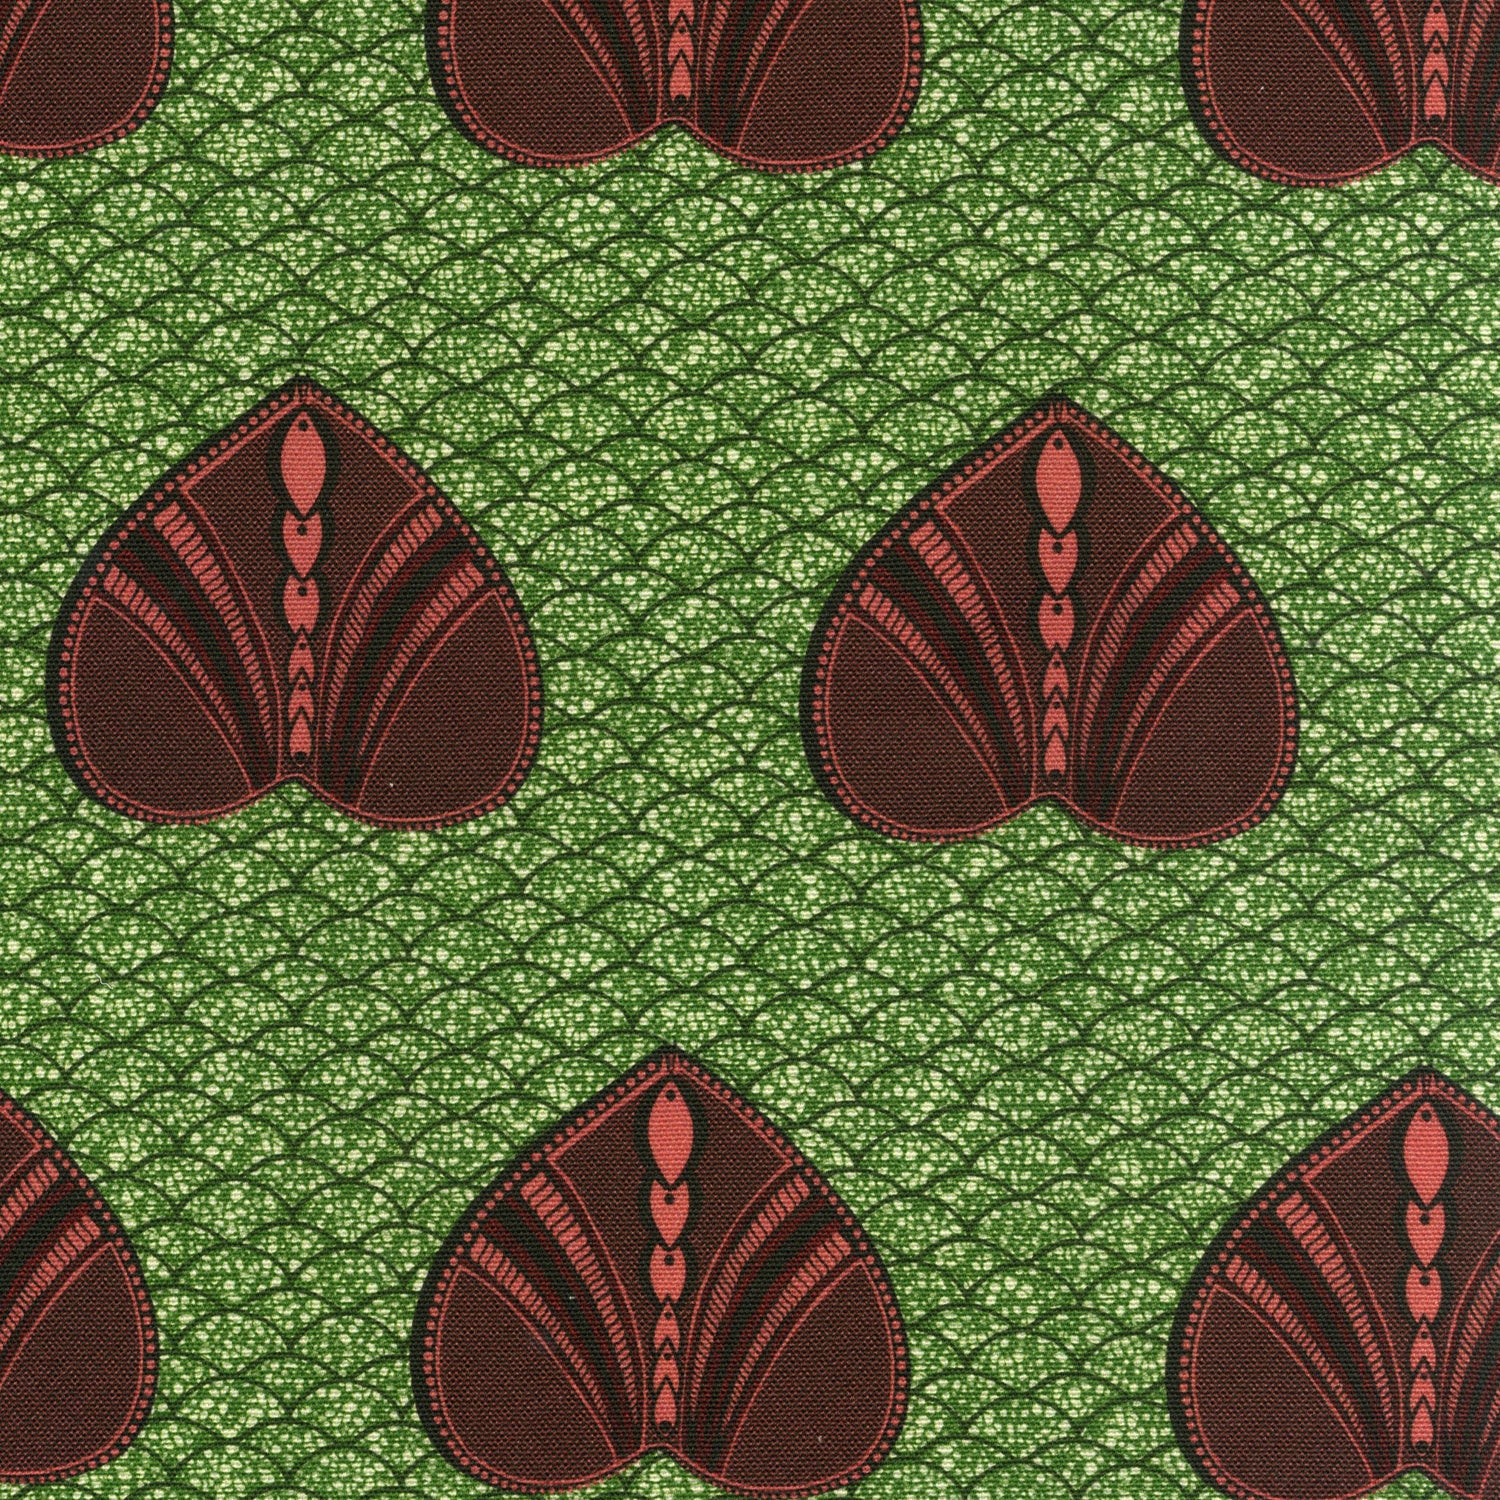 Detail of fabric in a geometric heart print in maroon and black on a green field.